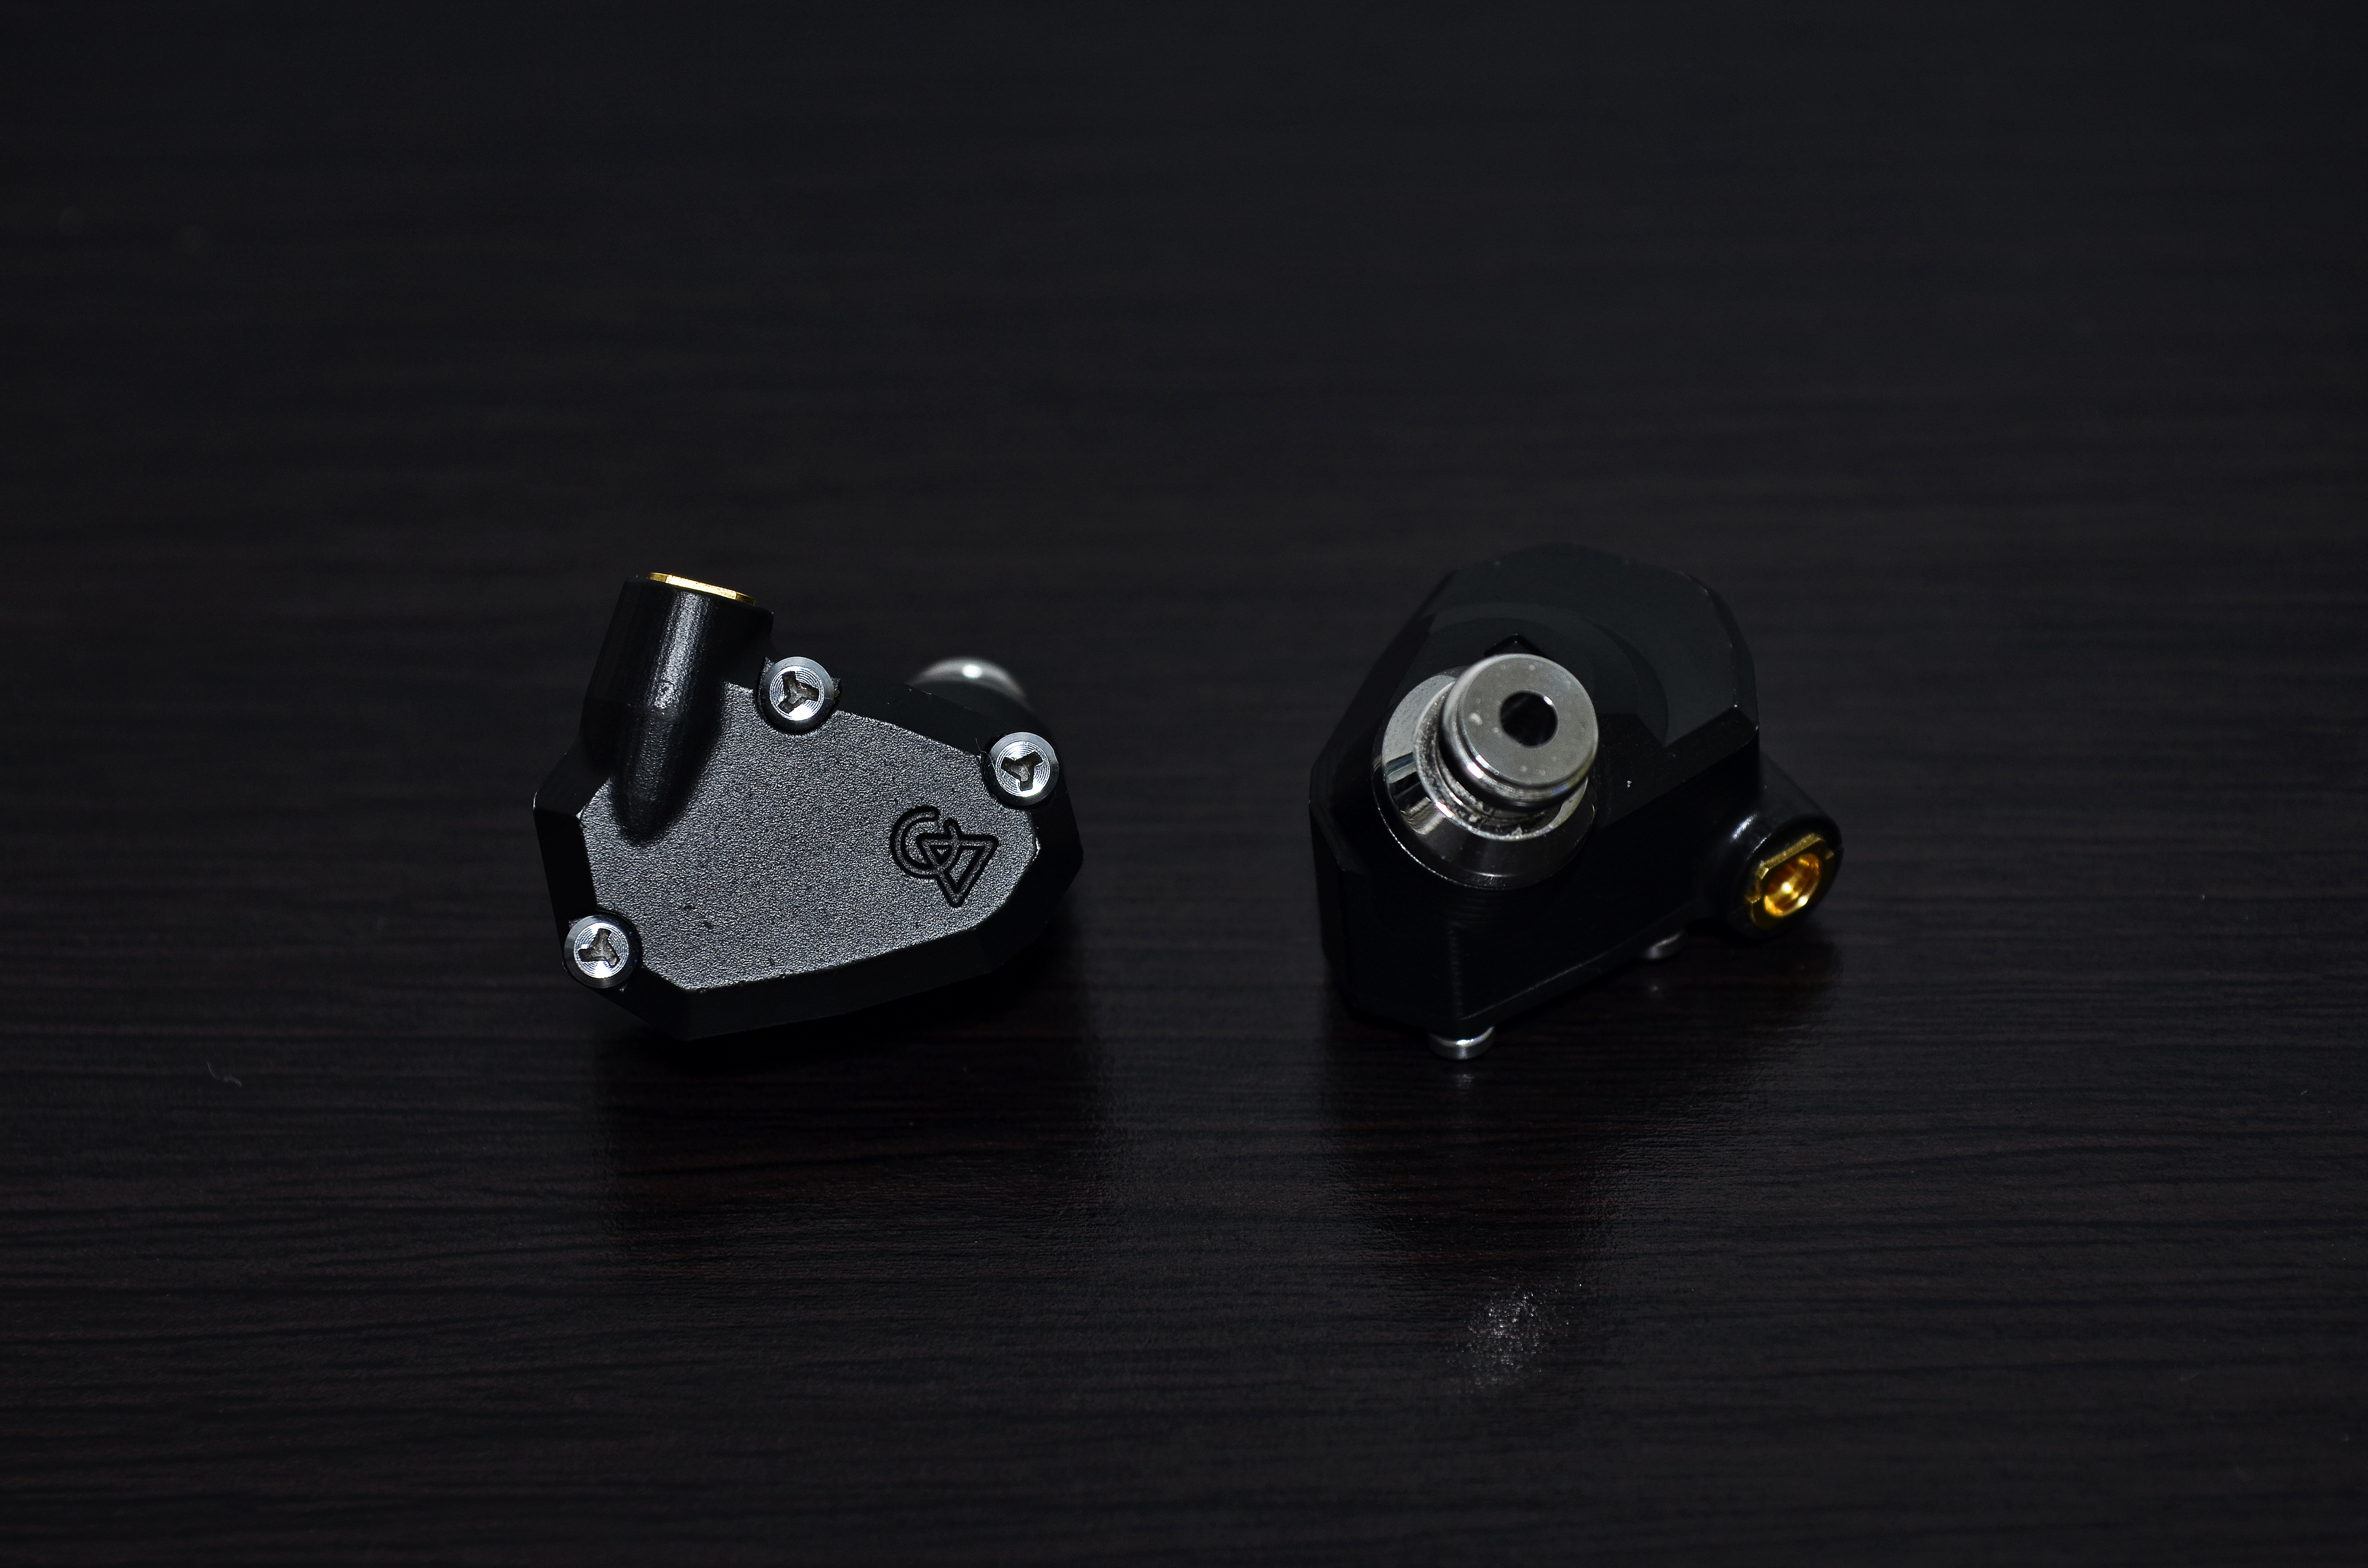 Campfire Audio Orion - Reviews | Headphone Reviews and Discussion -  Head